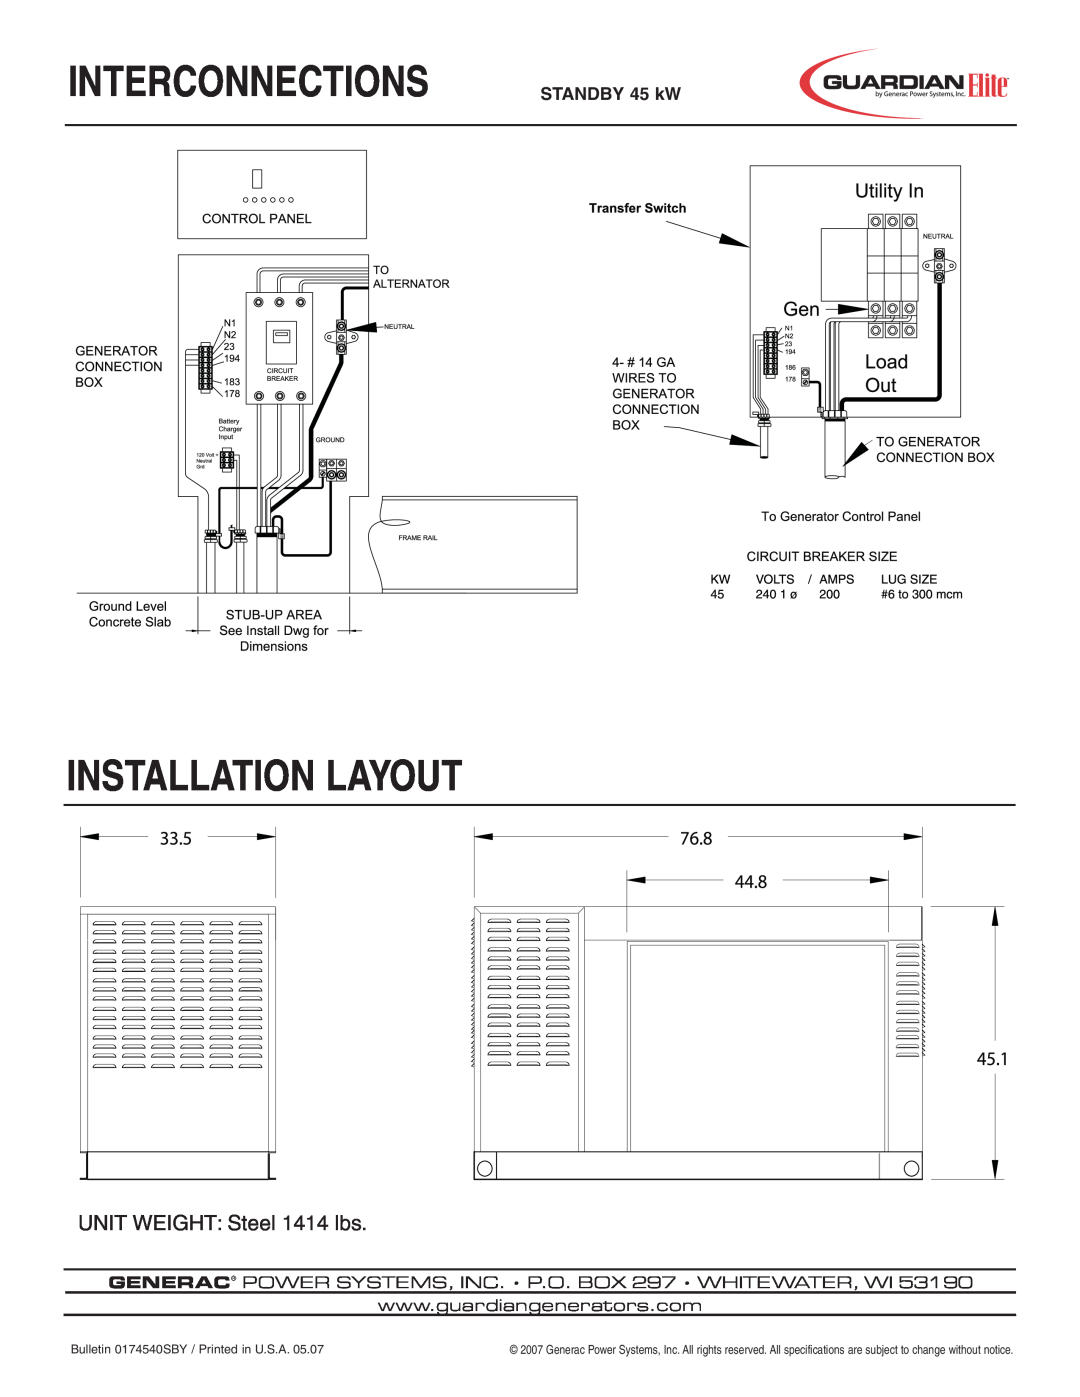 Generac Power Systems 5261 manual Interconnections, Installation Layout, UNIT WEIGHT Steel 1414 lbs, STANDBY 45 kW 